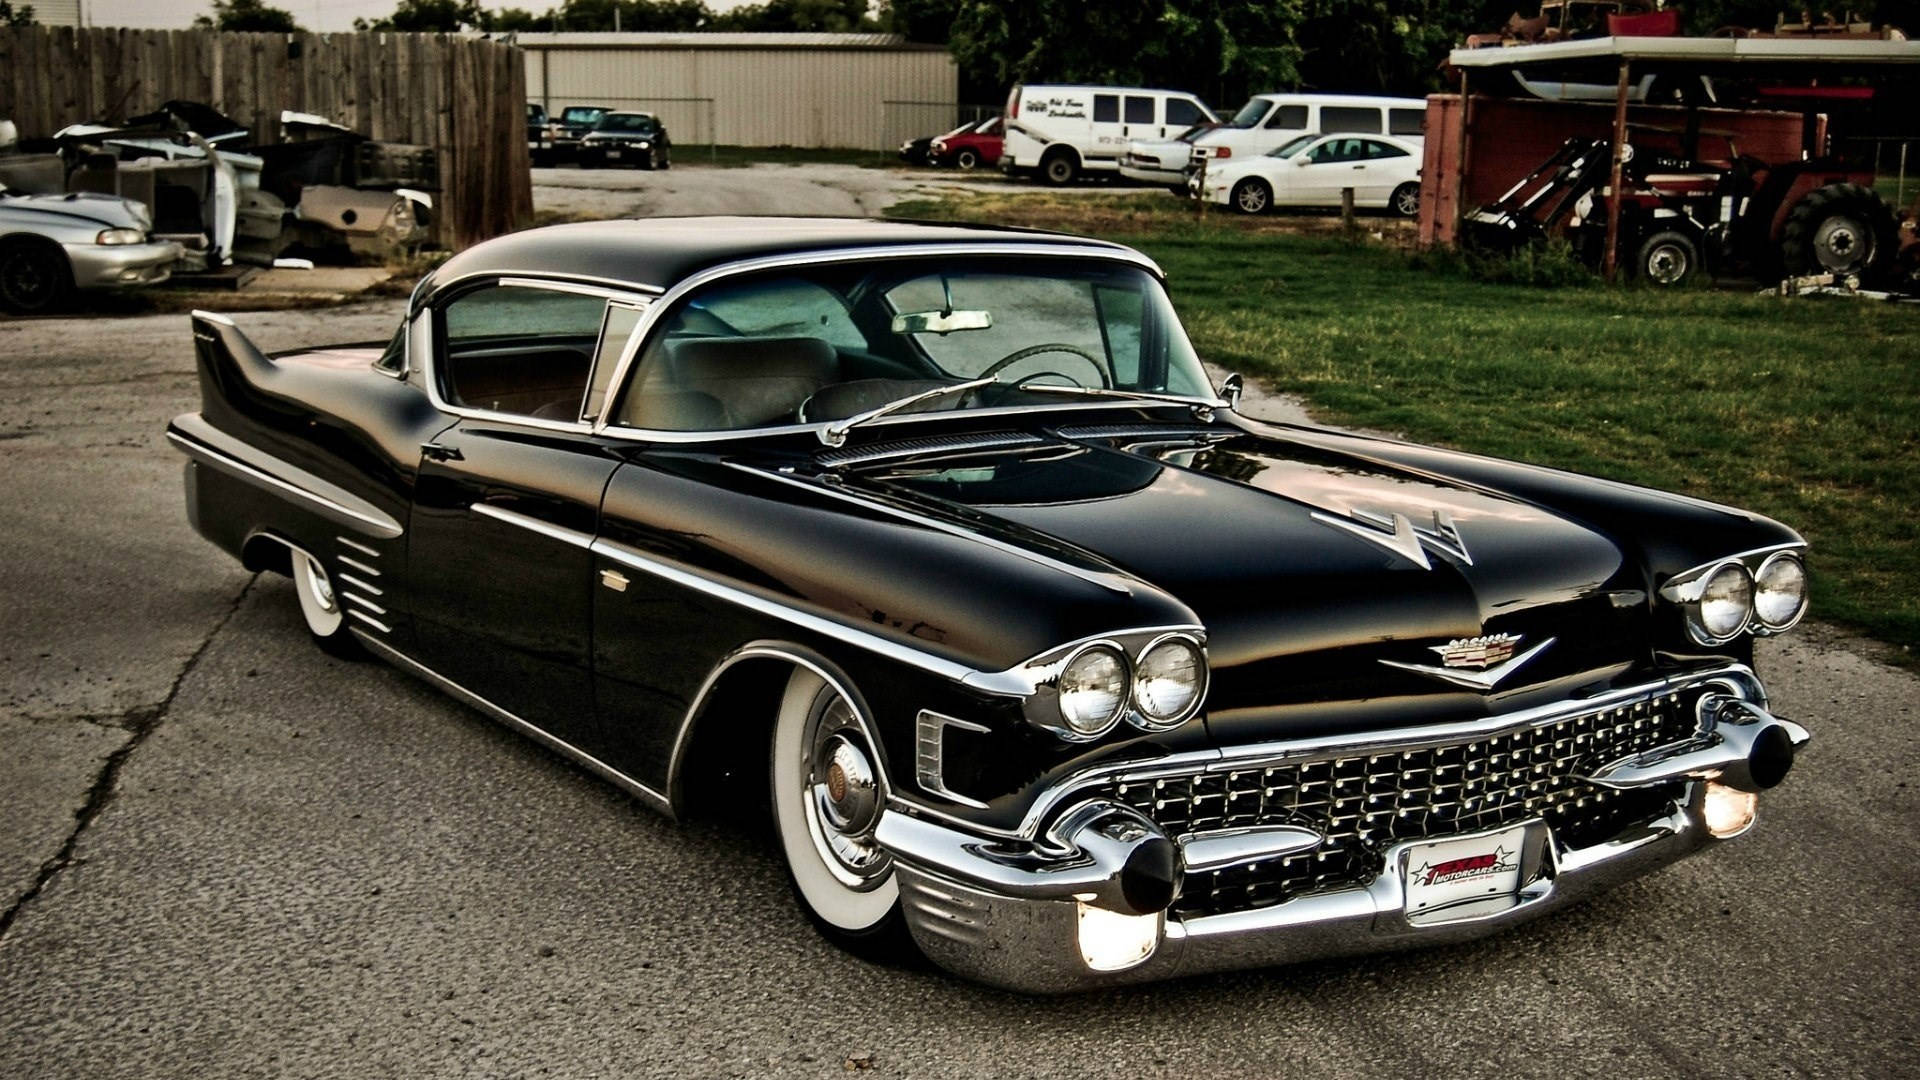 1958 Black Cadillac From Iphone Background